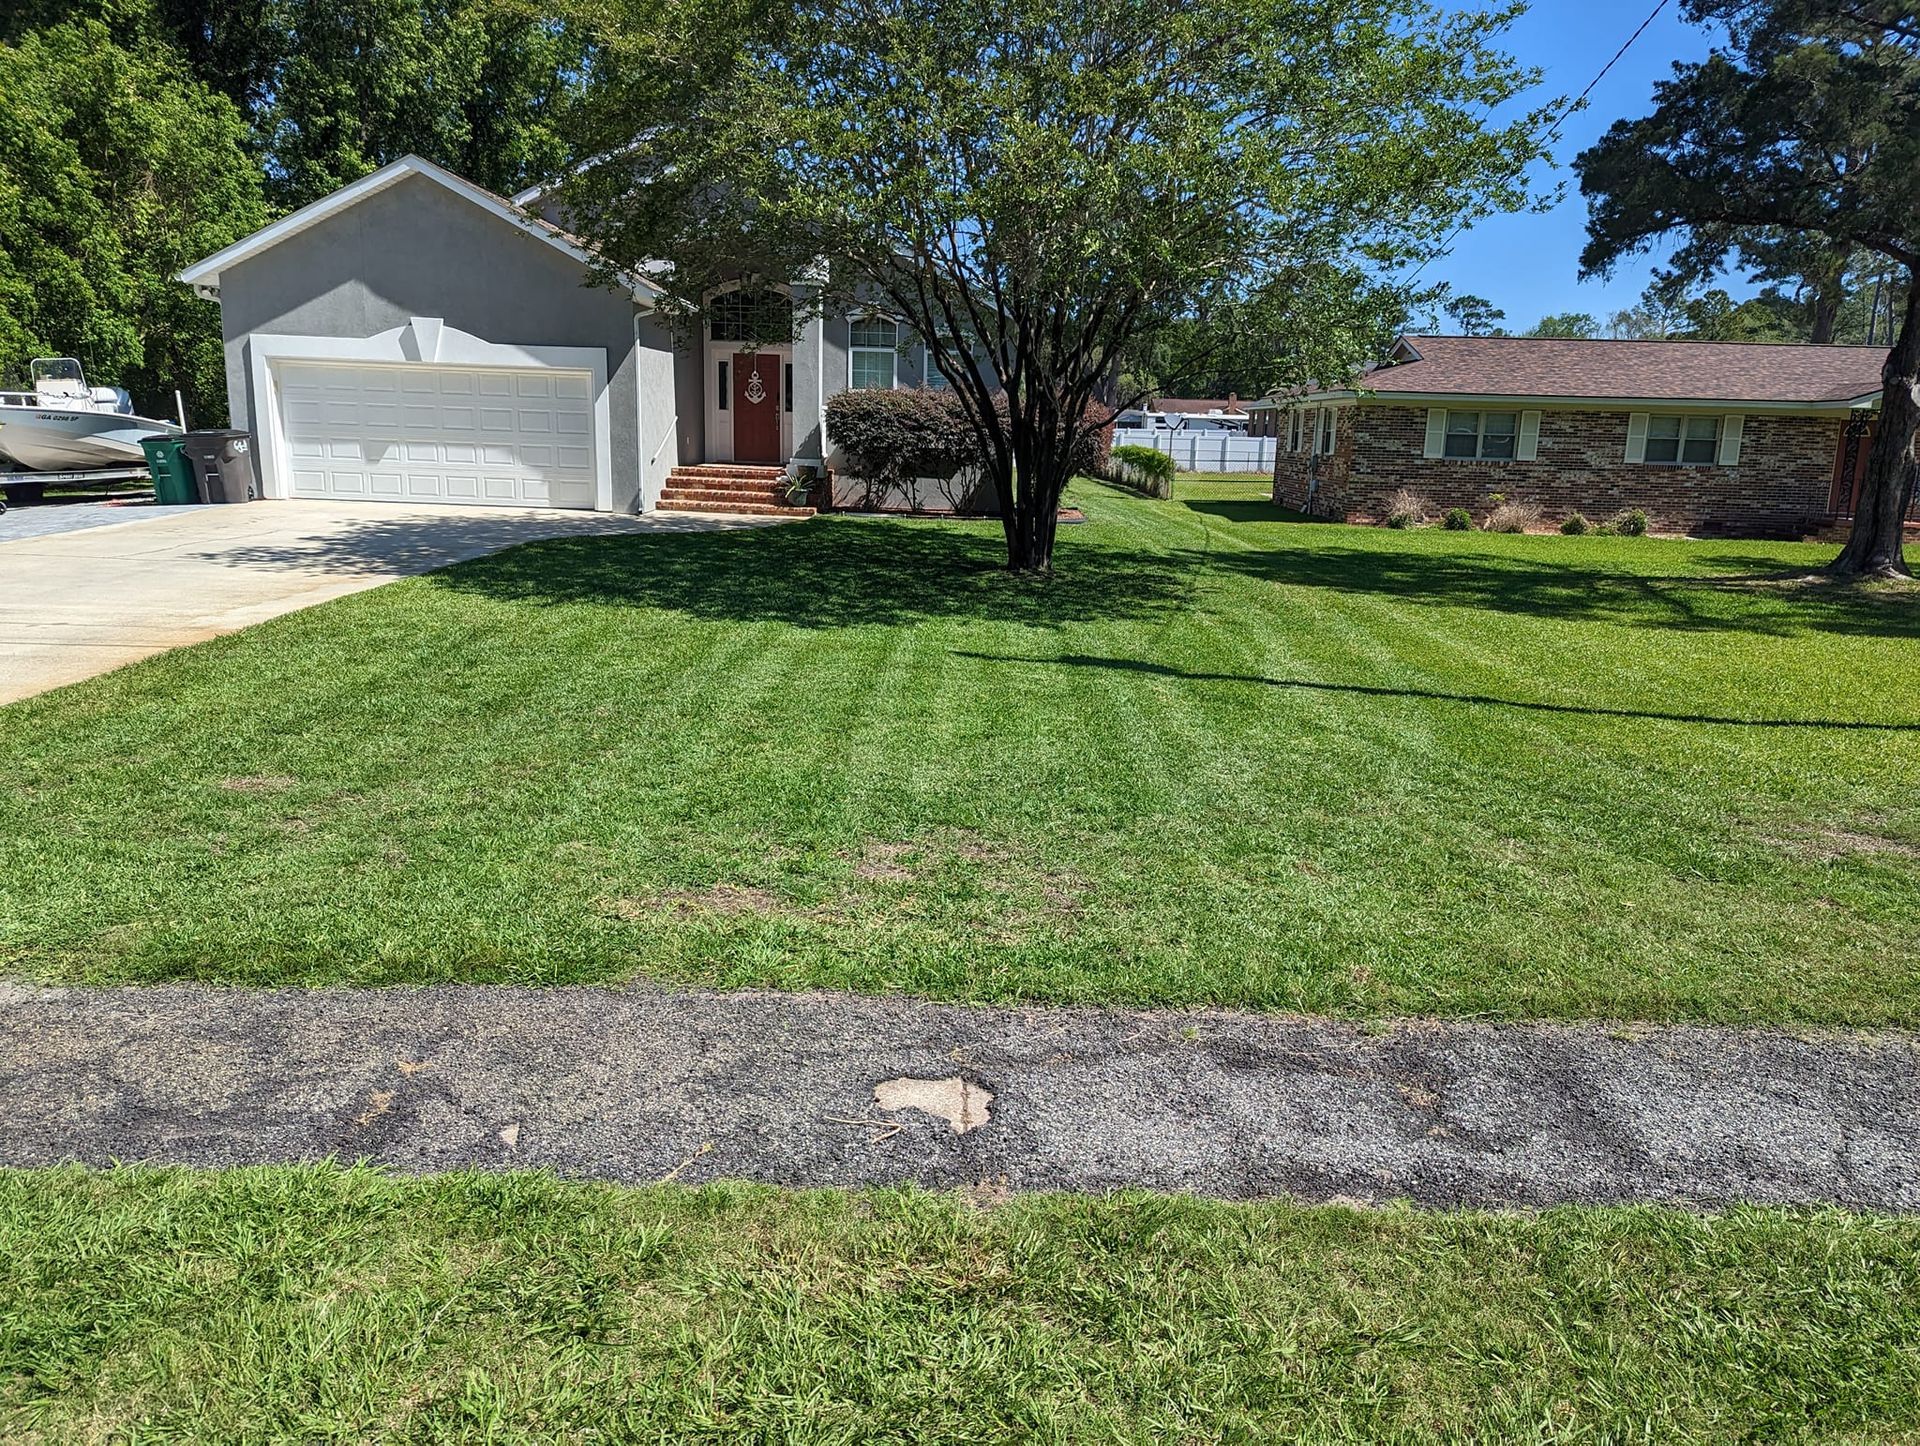 pressure washing services in st. mary's ga